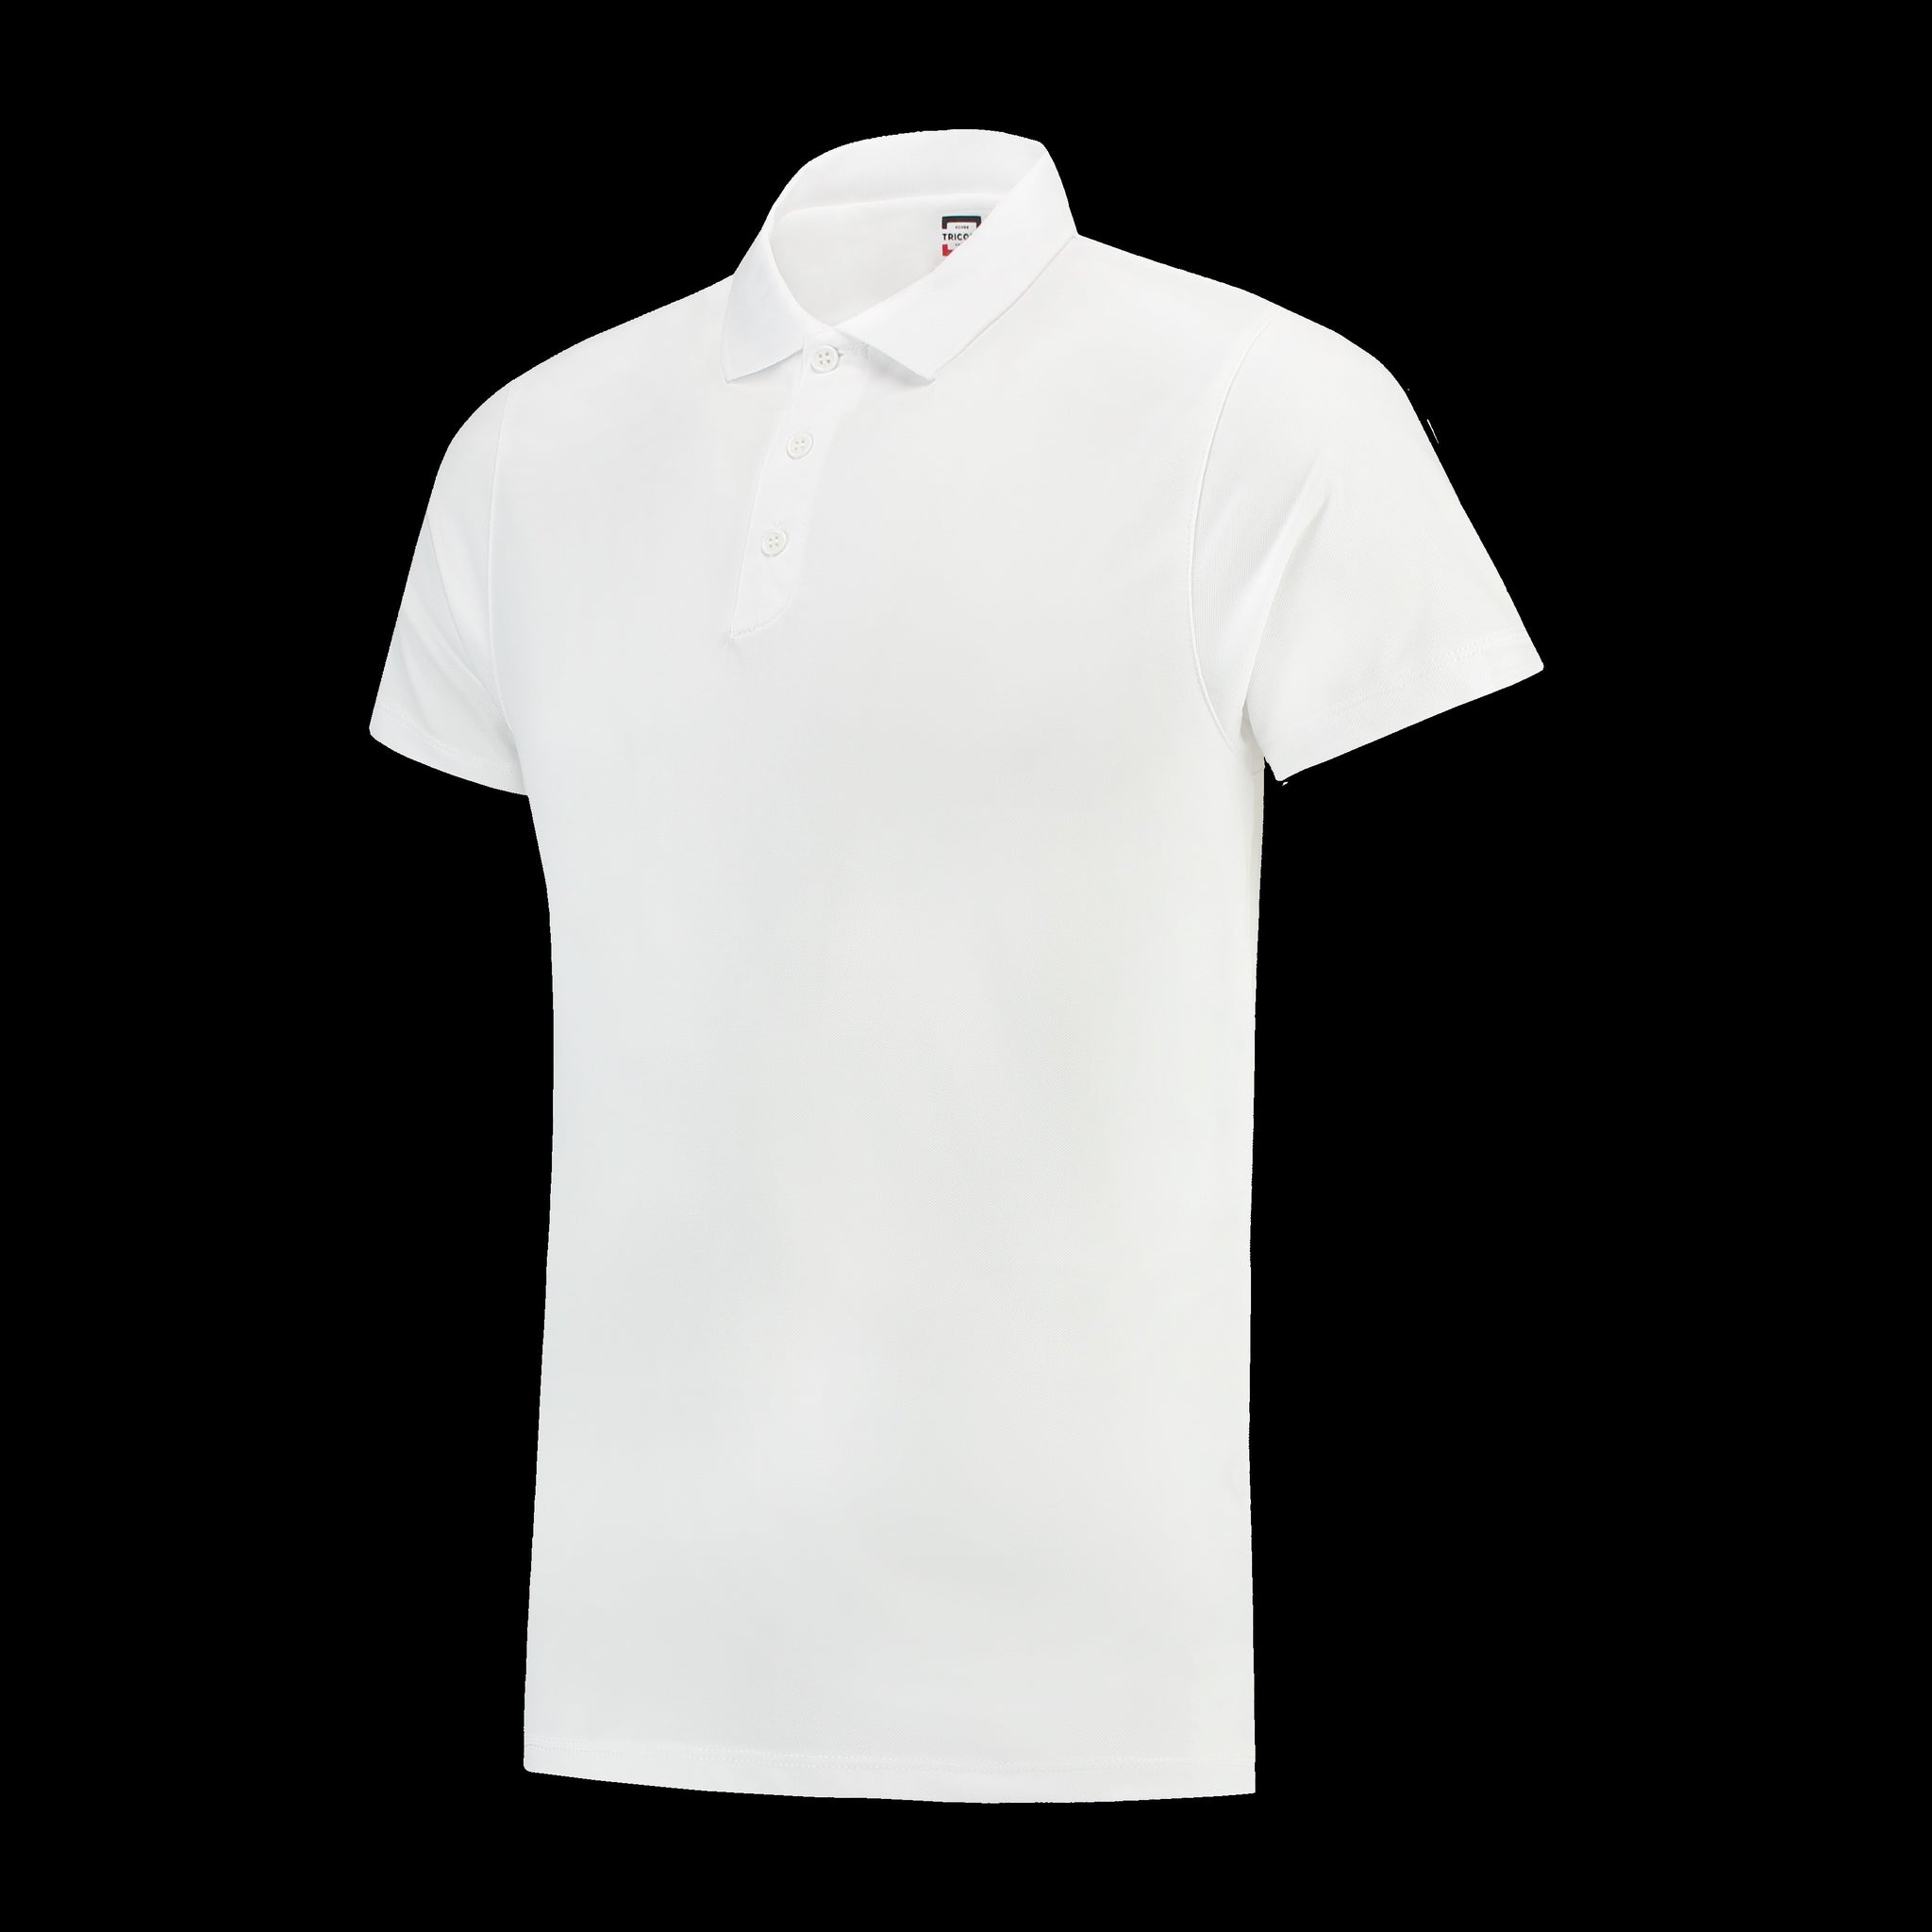 Poloshirt Cooldry Bamboe Fitted 201001